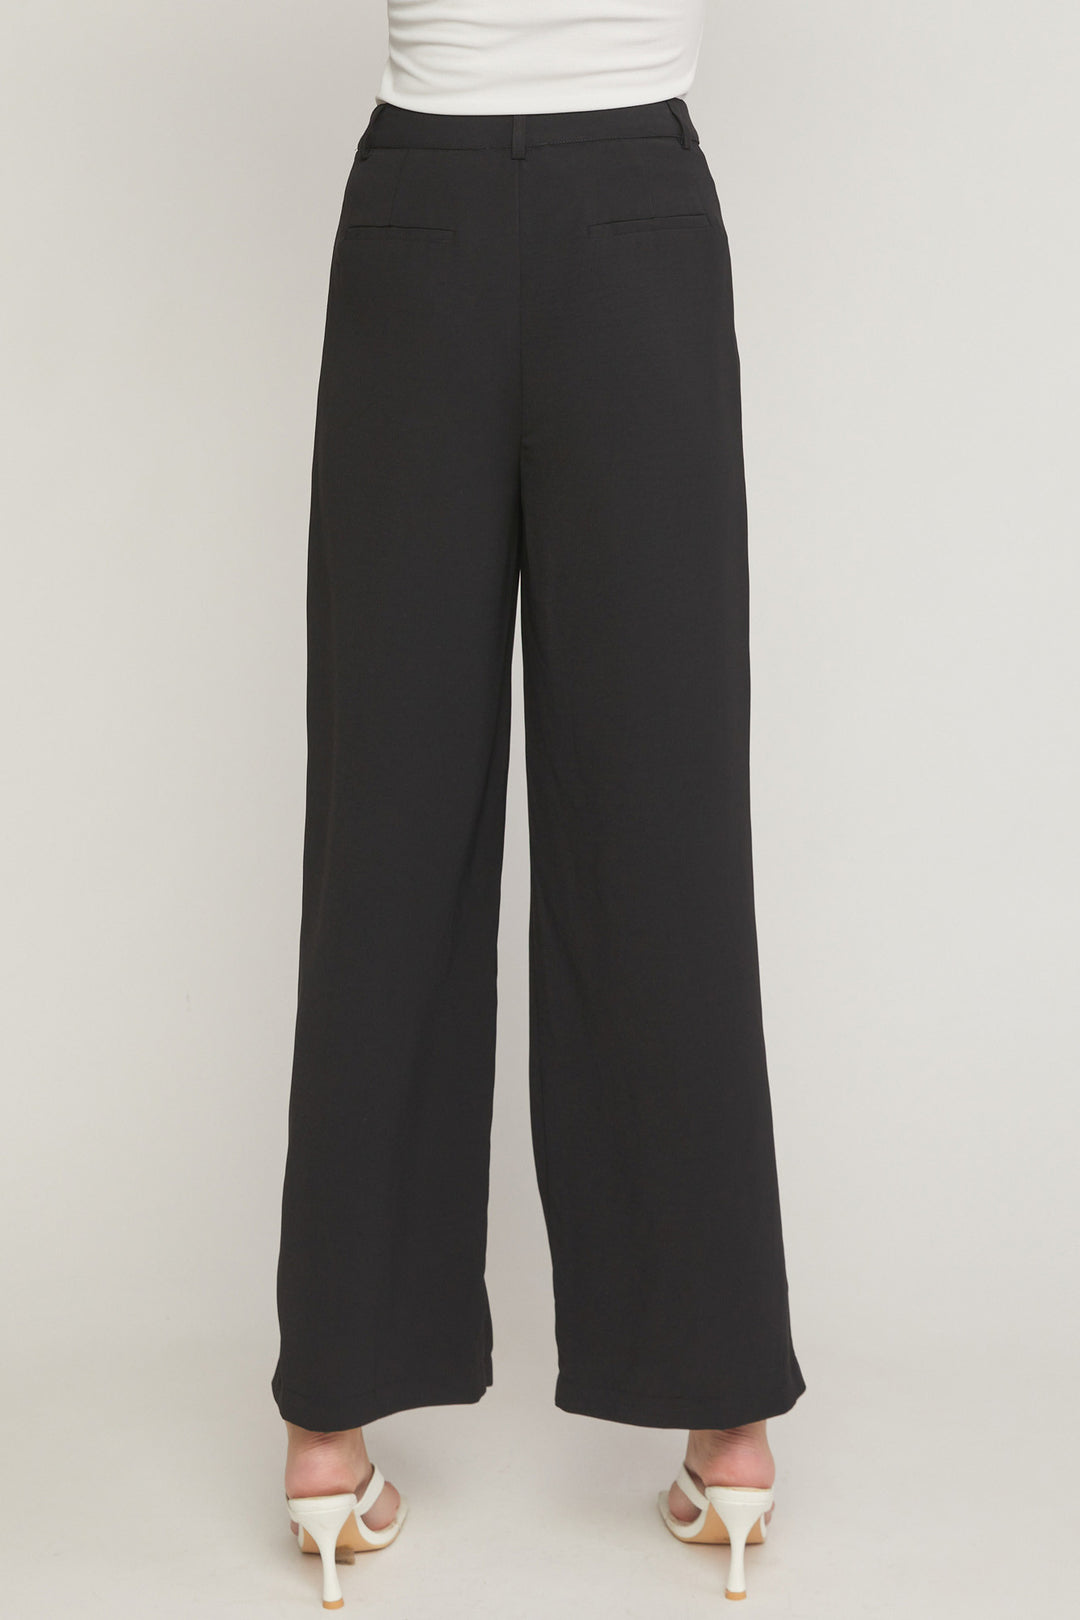 Solid High Waisted Pants with Pockets